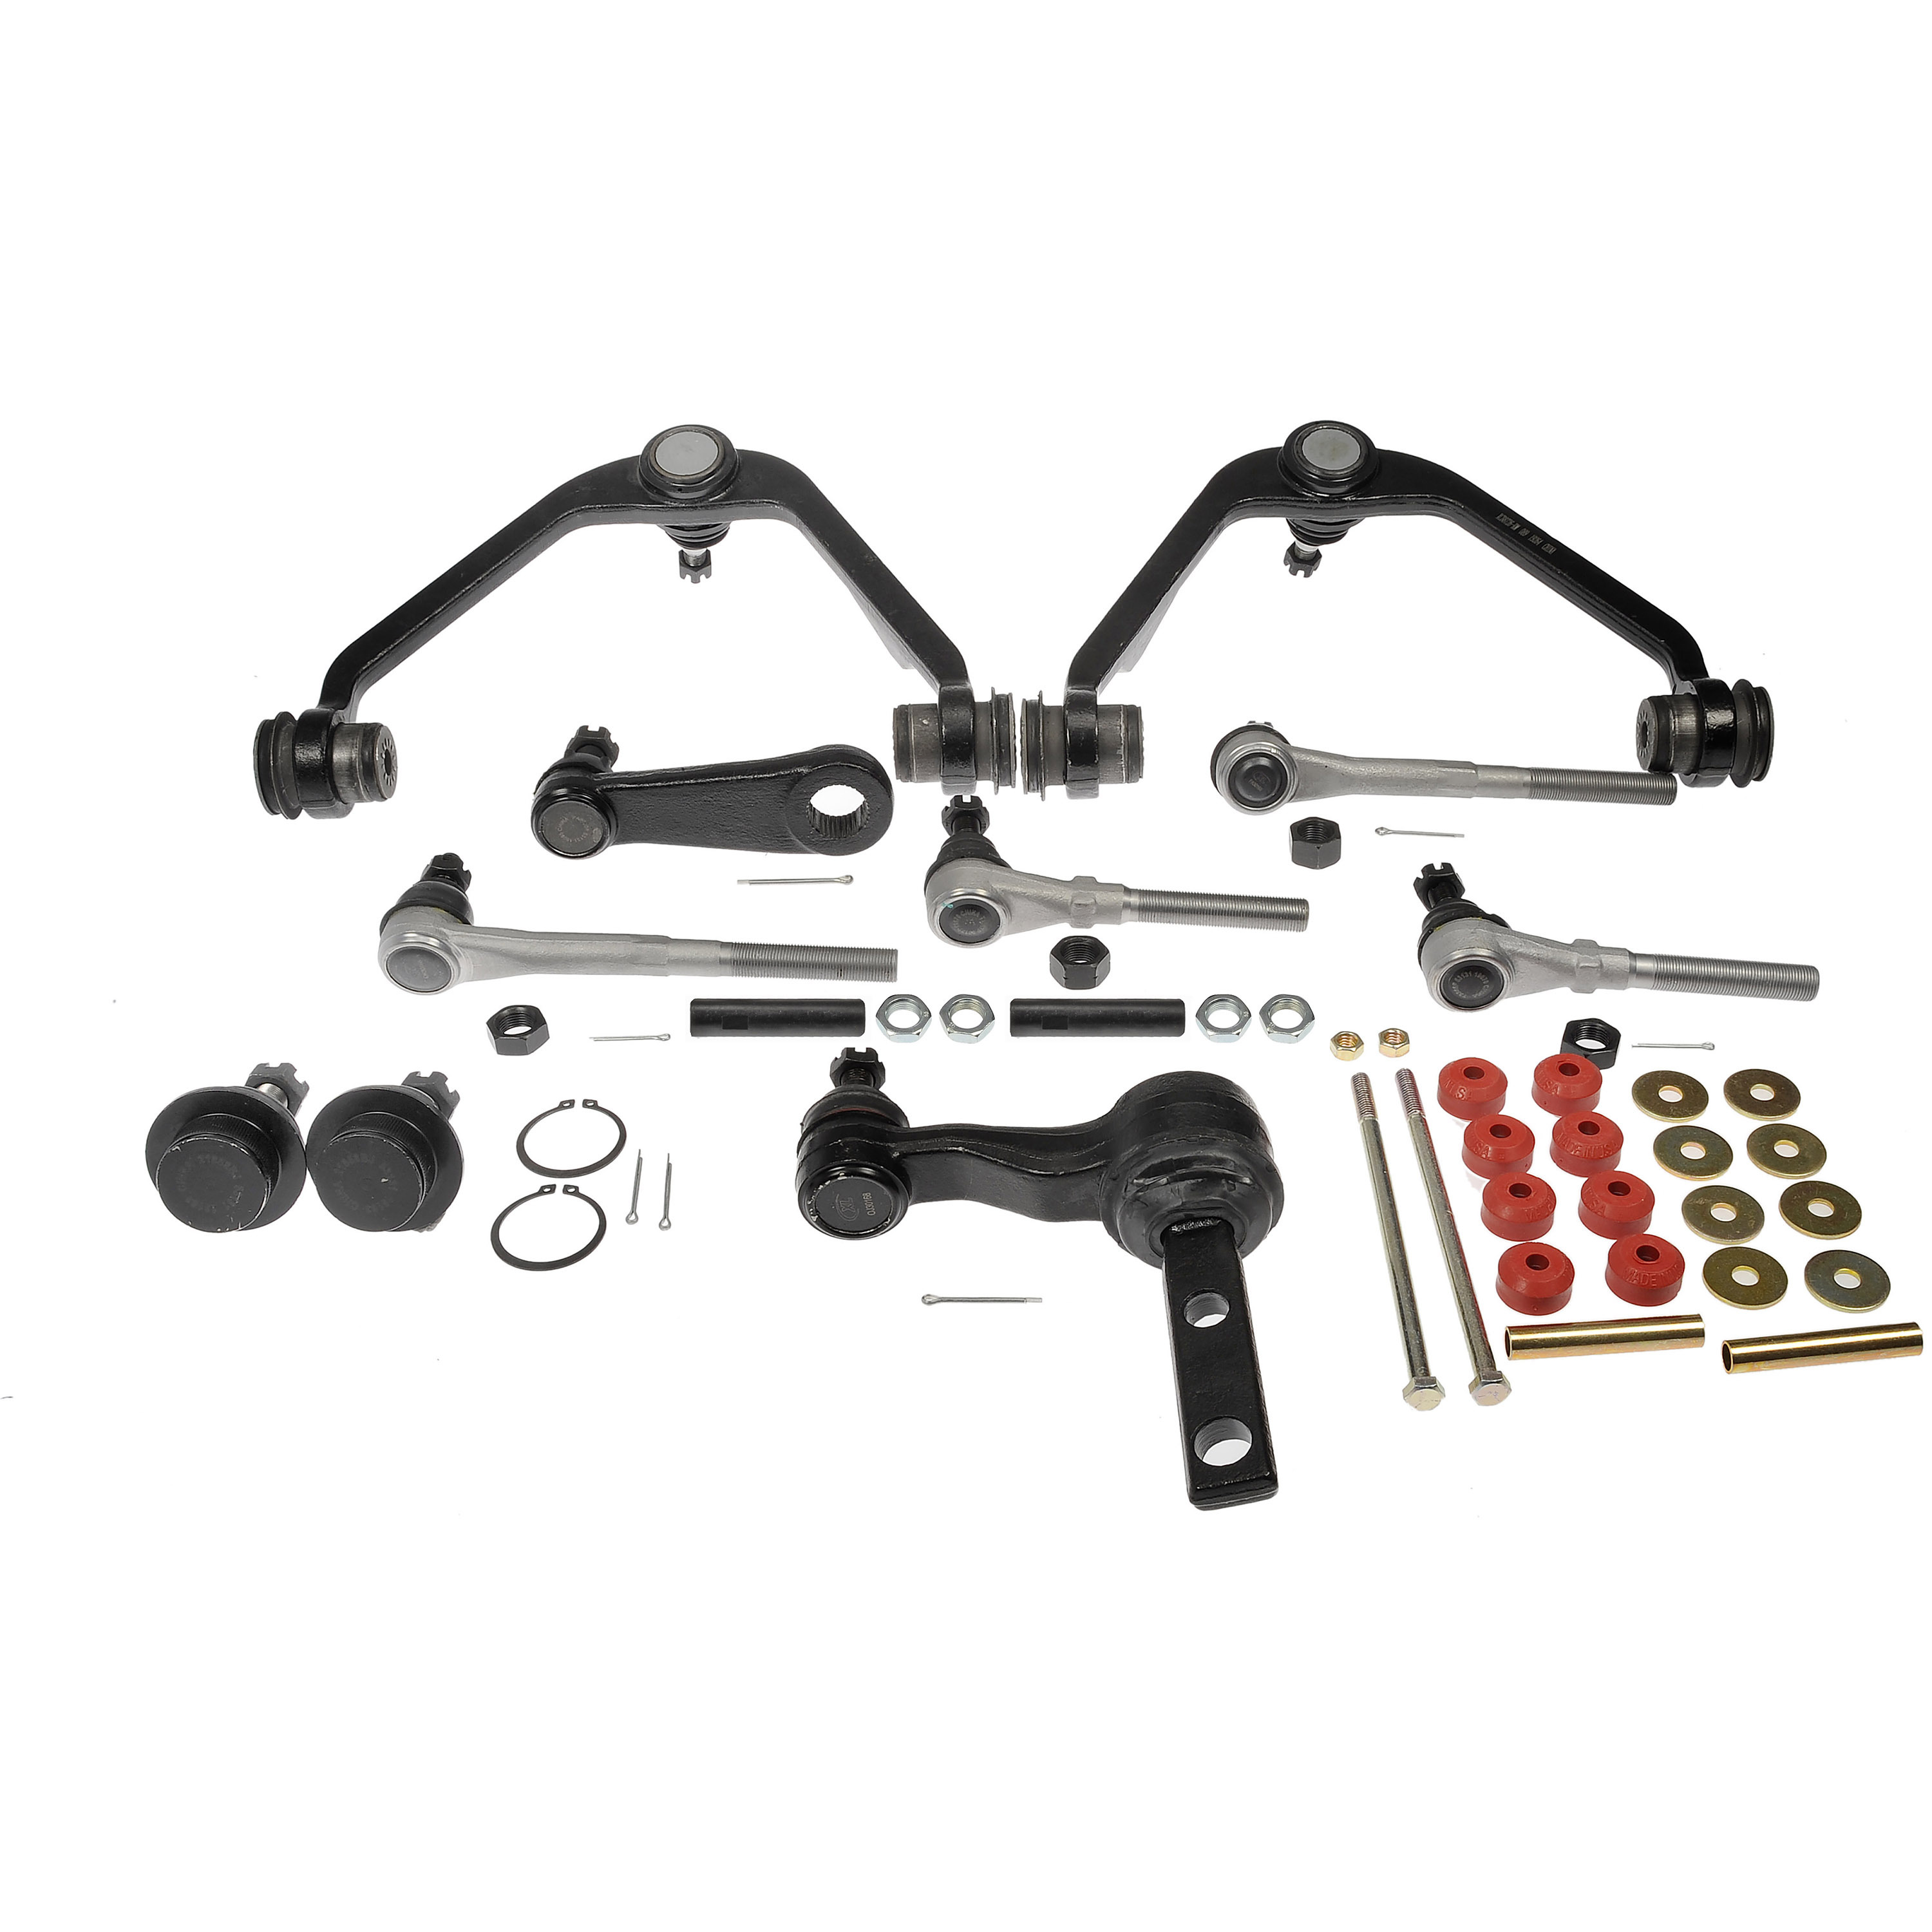 Dorman FEK87029XL Front Suspension Kit for Specific Ford / Lincoln Models Fits select: 1997-2003 FORD F150, 1997-2002 FORD EXPEDITION - image 3 of 5